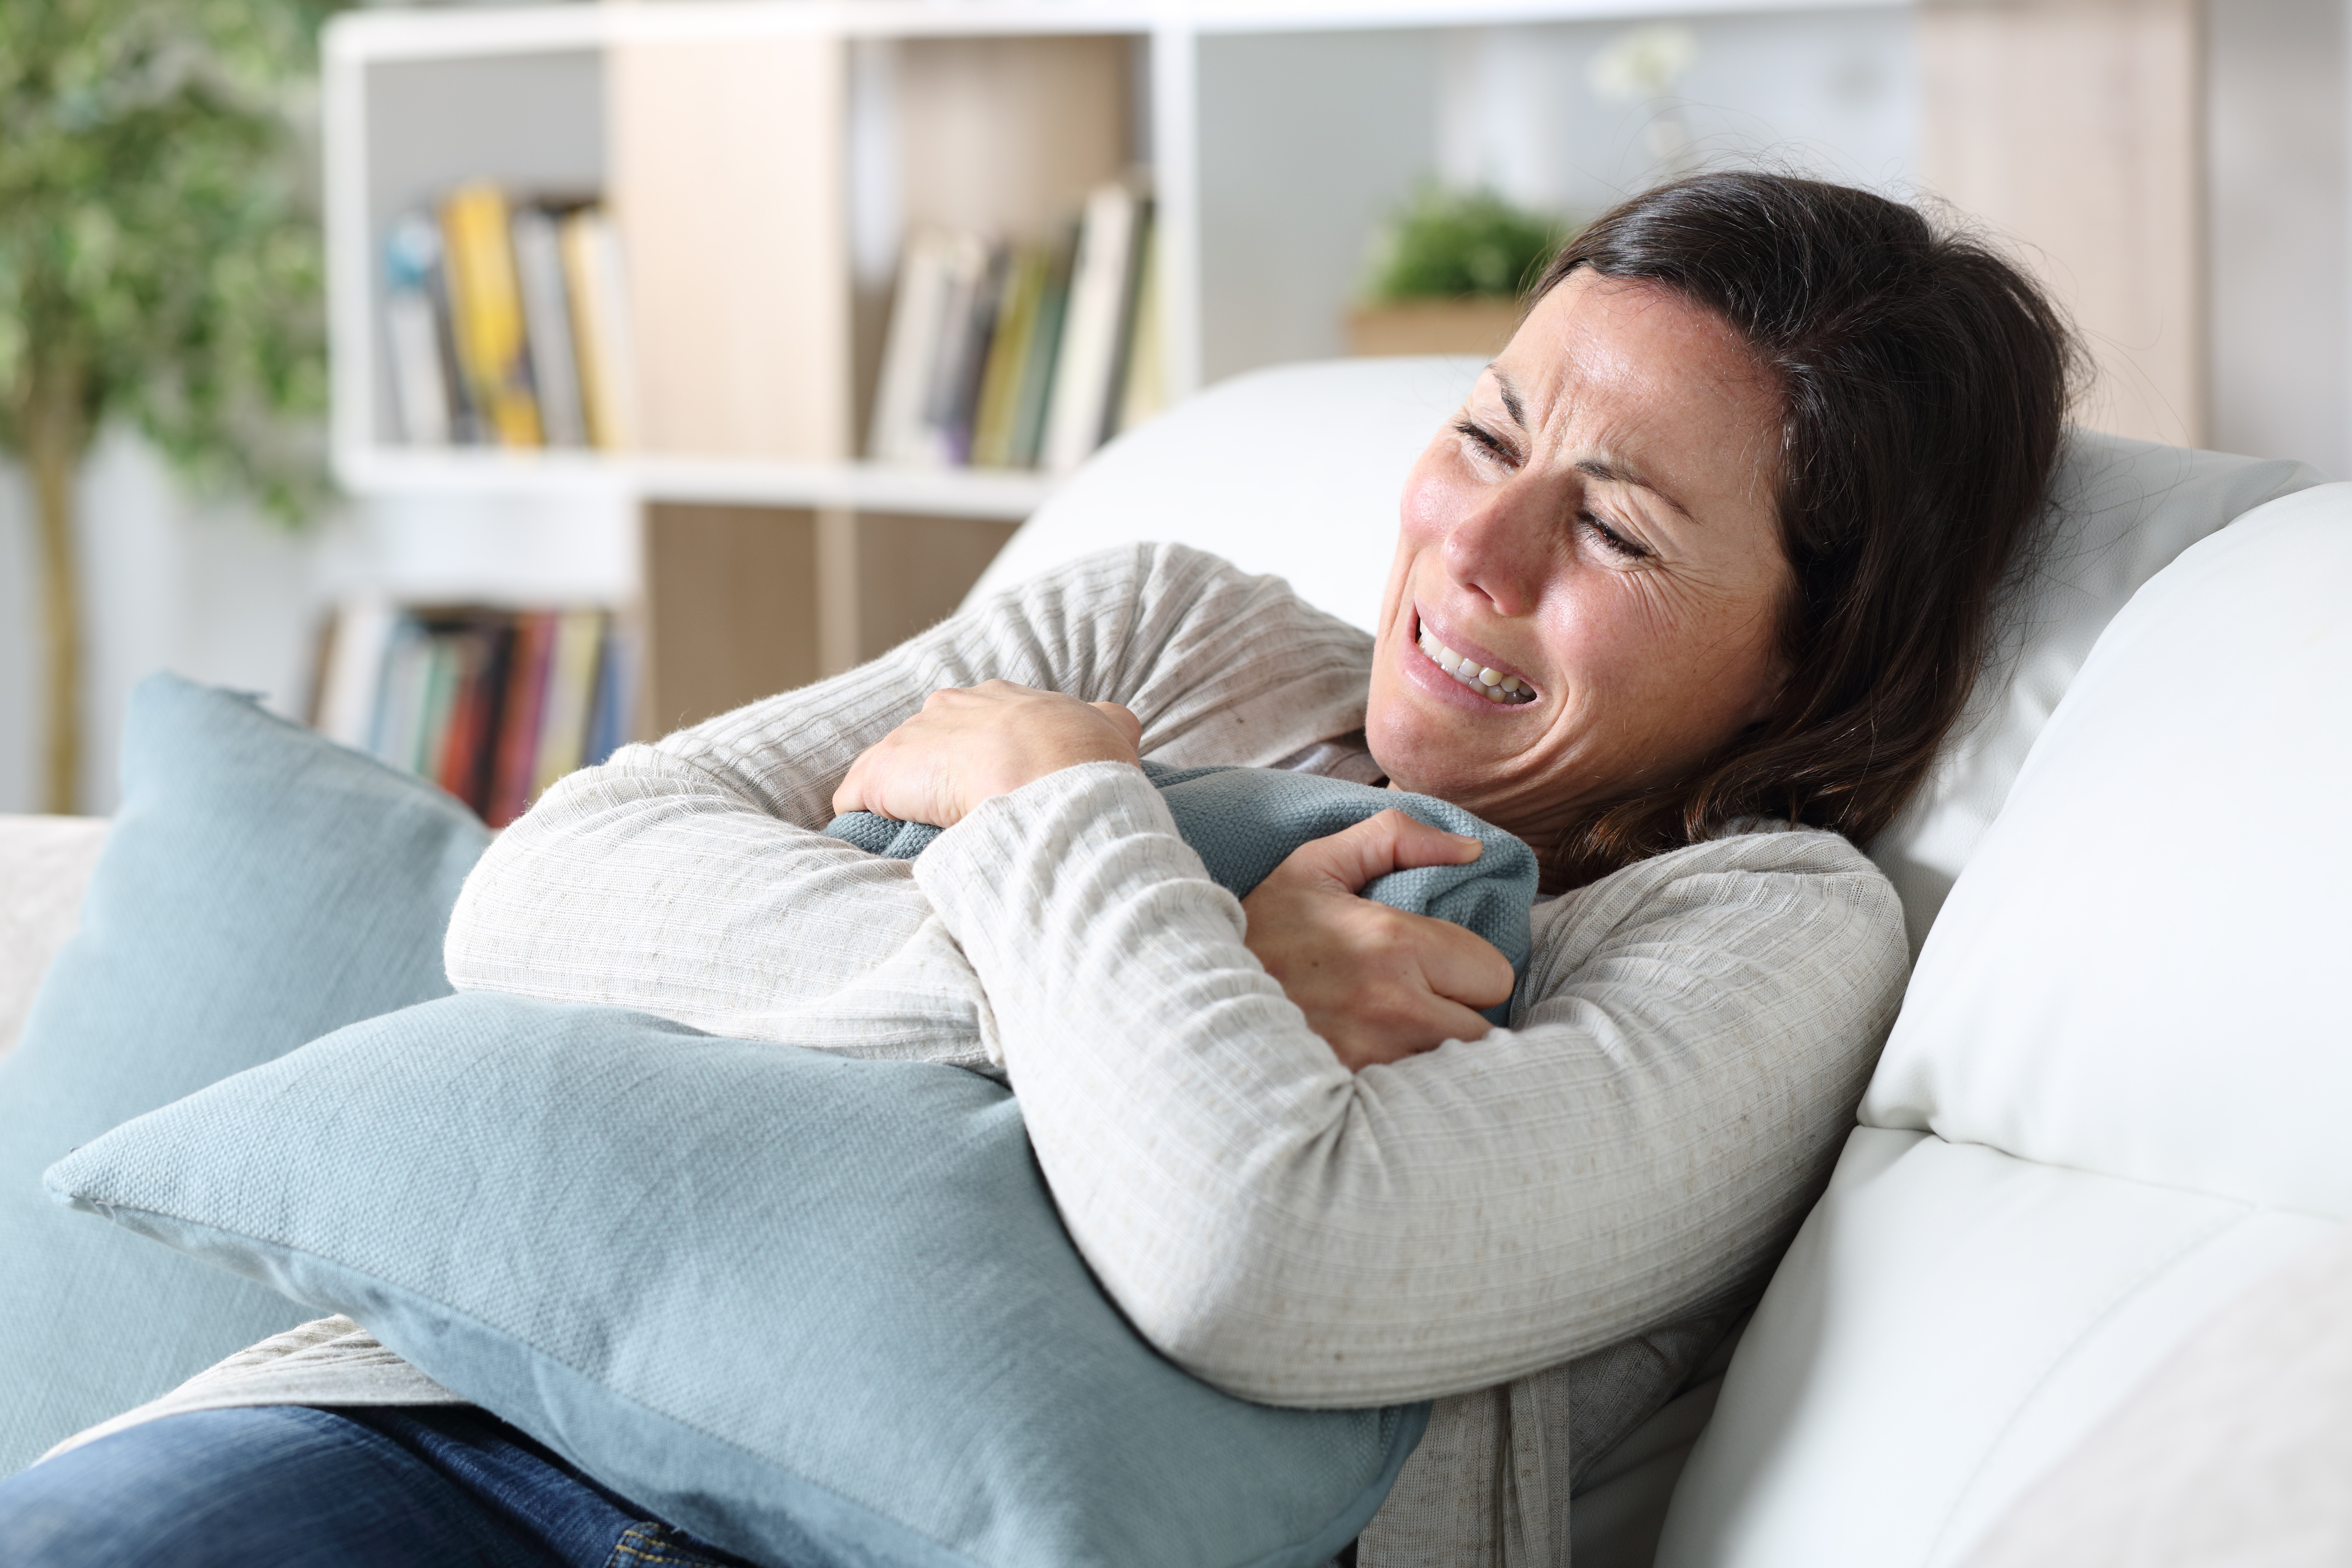 Sad woman is crying at home | Source: Shutterstock.com